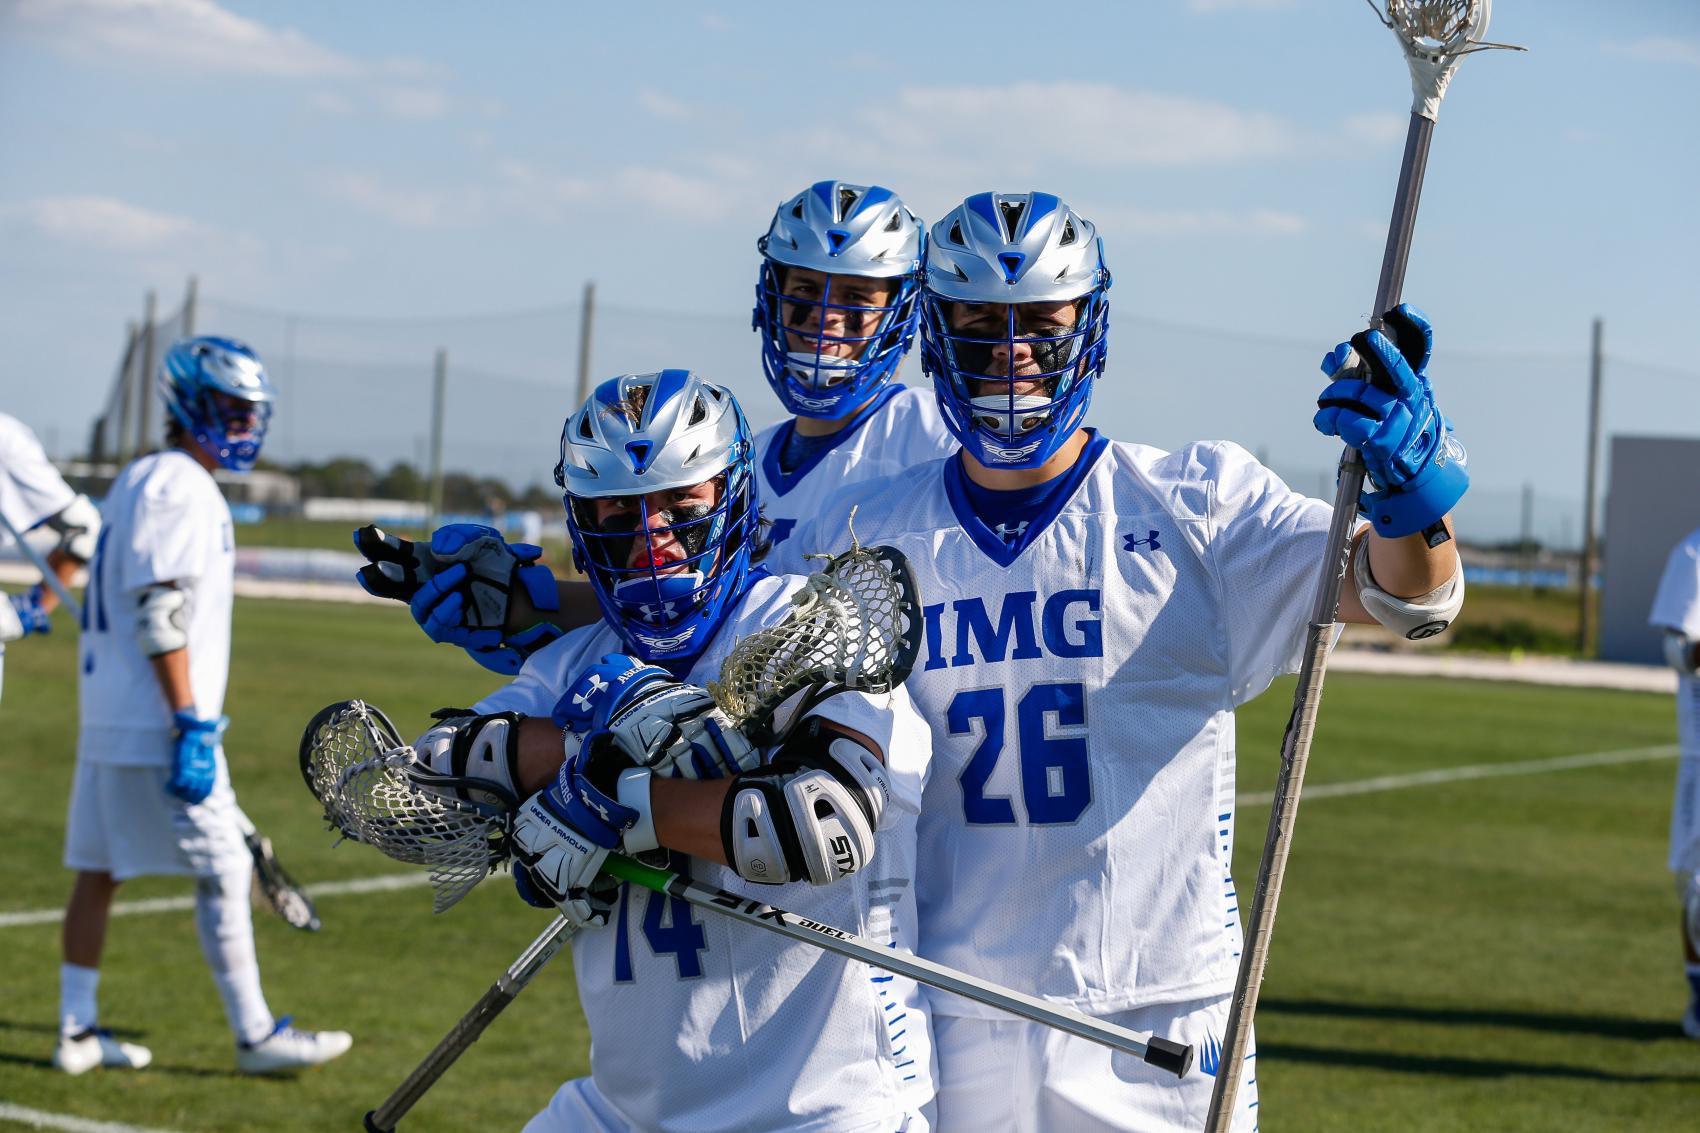 Lacrosse Camps Lacrosse Training IMG Academy 2018